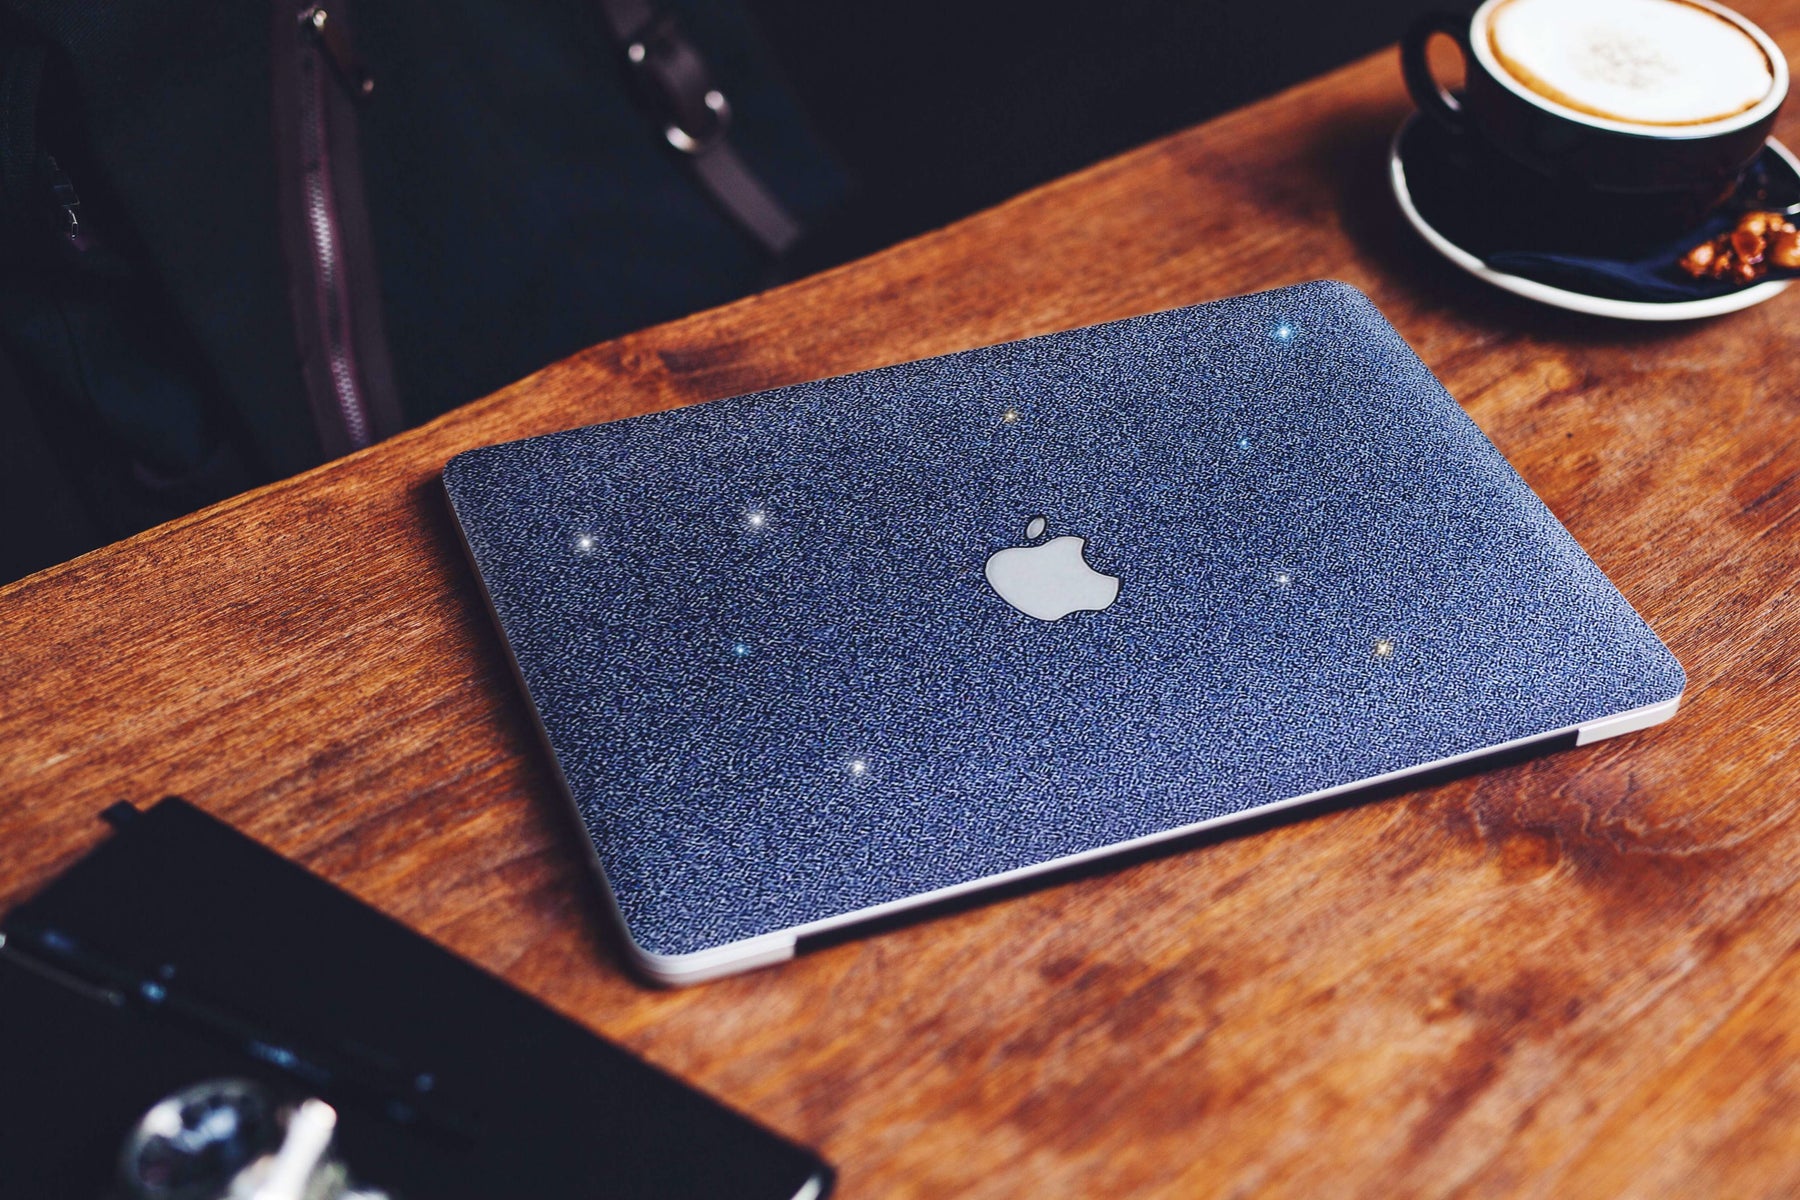 Glitter MACBOOK Case / Cover Air Pro Bedazzled Bling 11" 12" 13" 15" 16" Grayish Blue Sparkly Shinny Bejeweled Bedazzled Bling Stylish